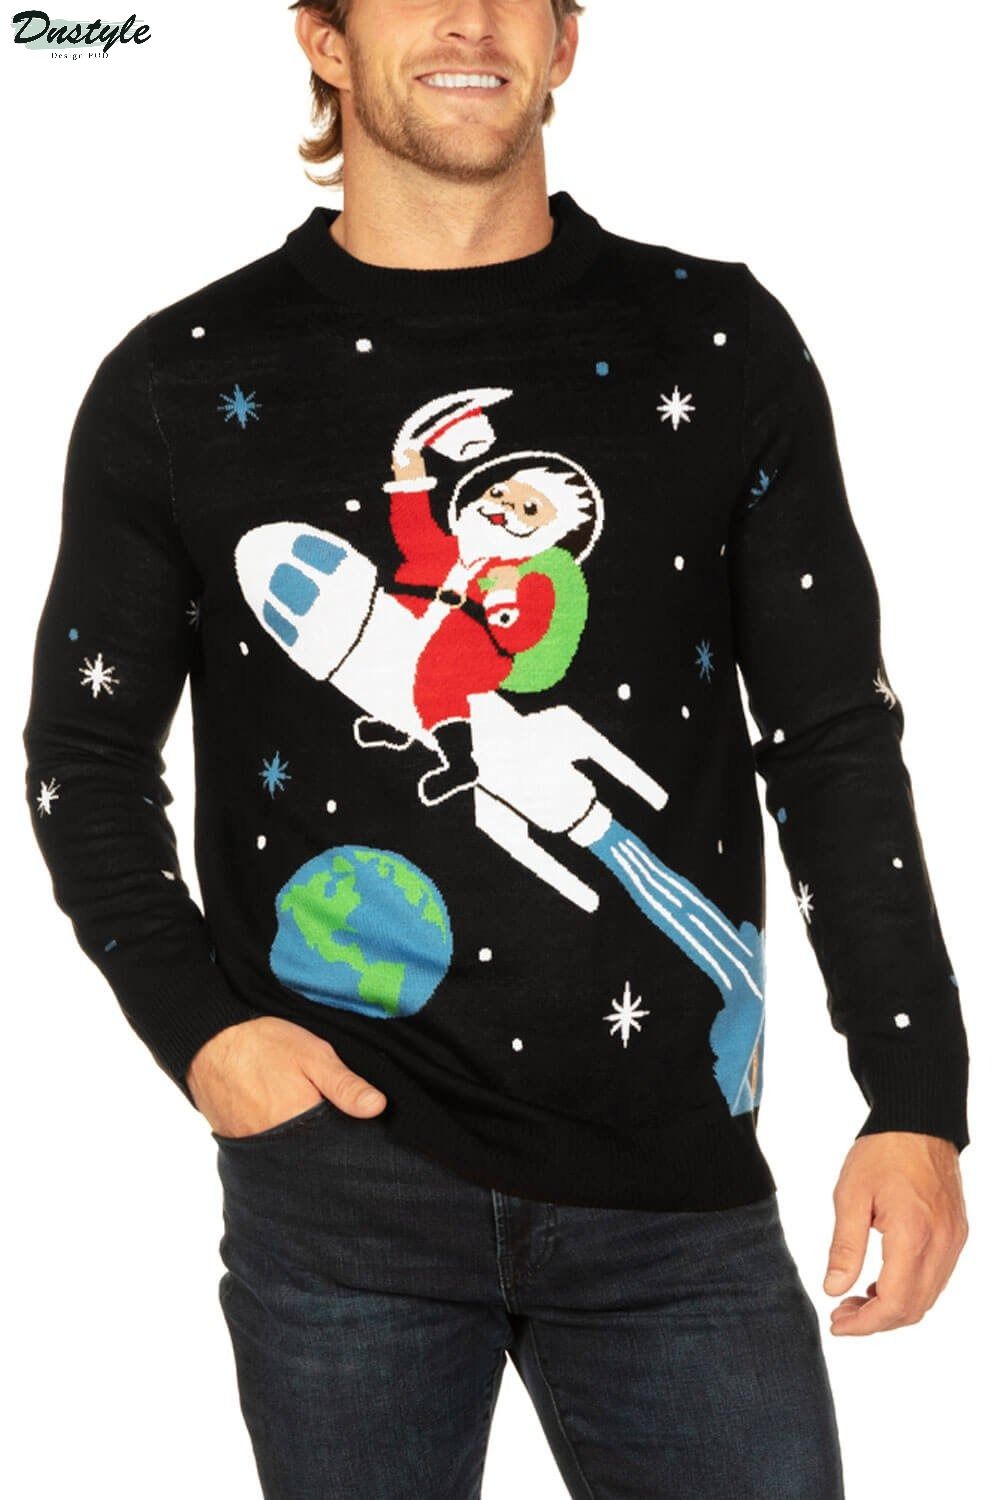 Bezos Blue Origin You Paid For This Ugly Christmas Sweater